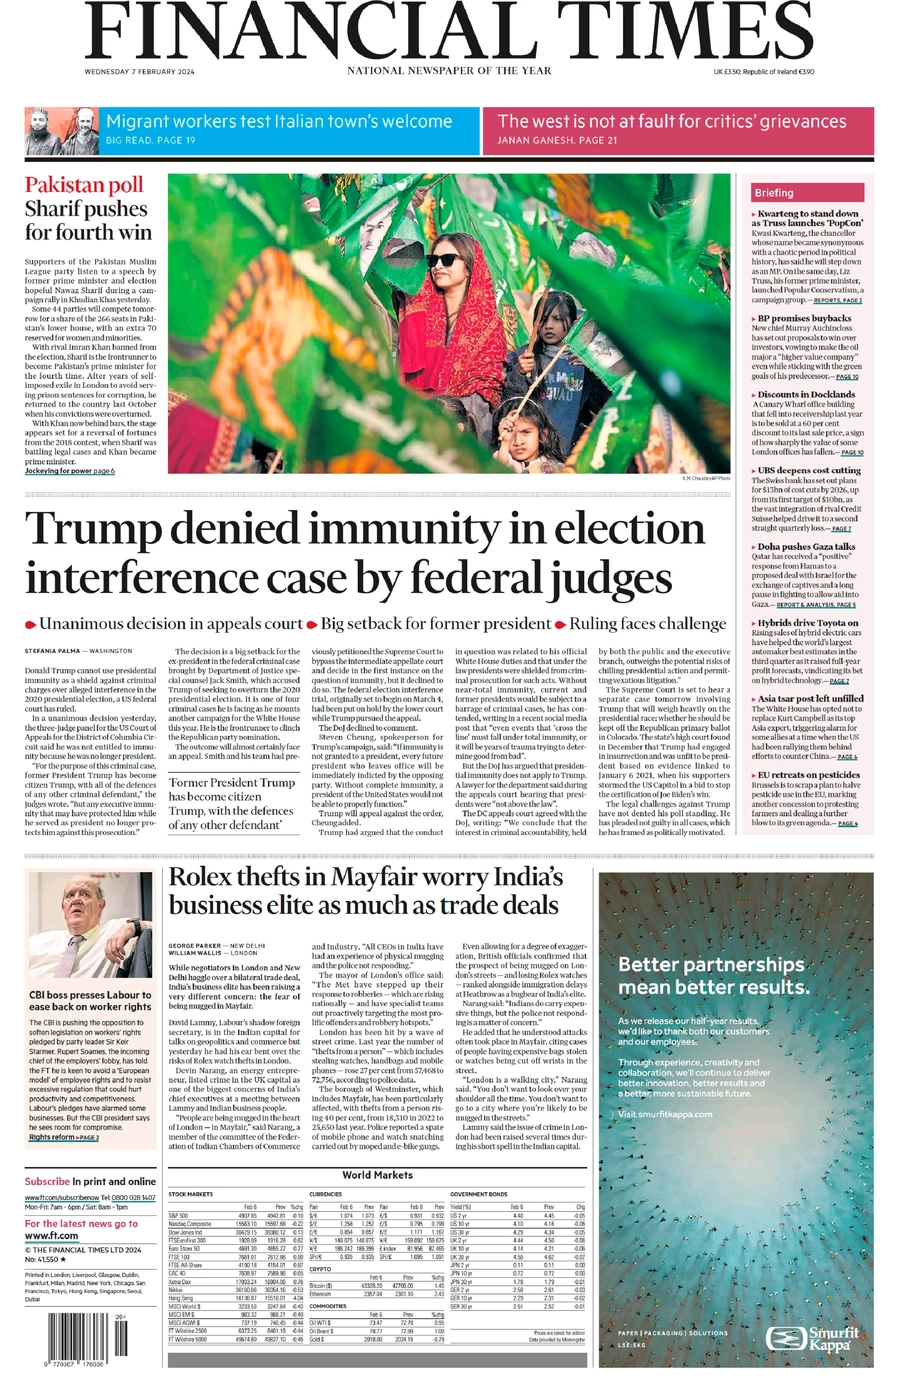 Financial Times - Trump denied immunity in election interference case by federal judges 